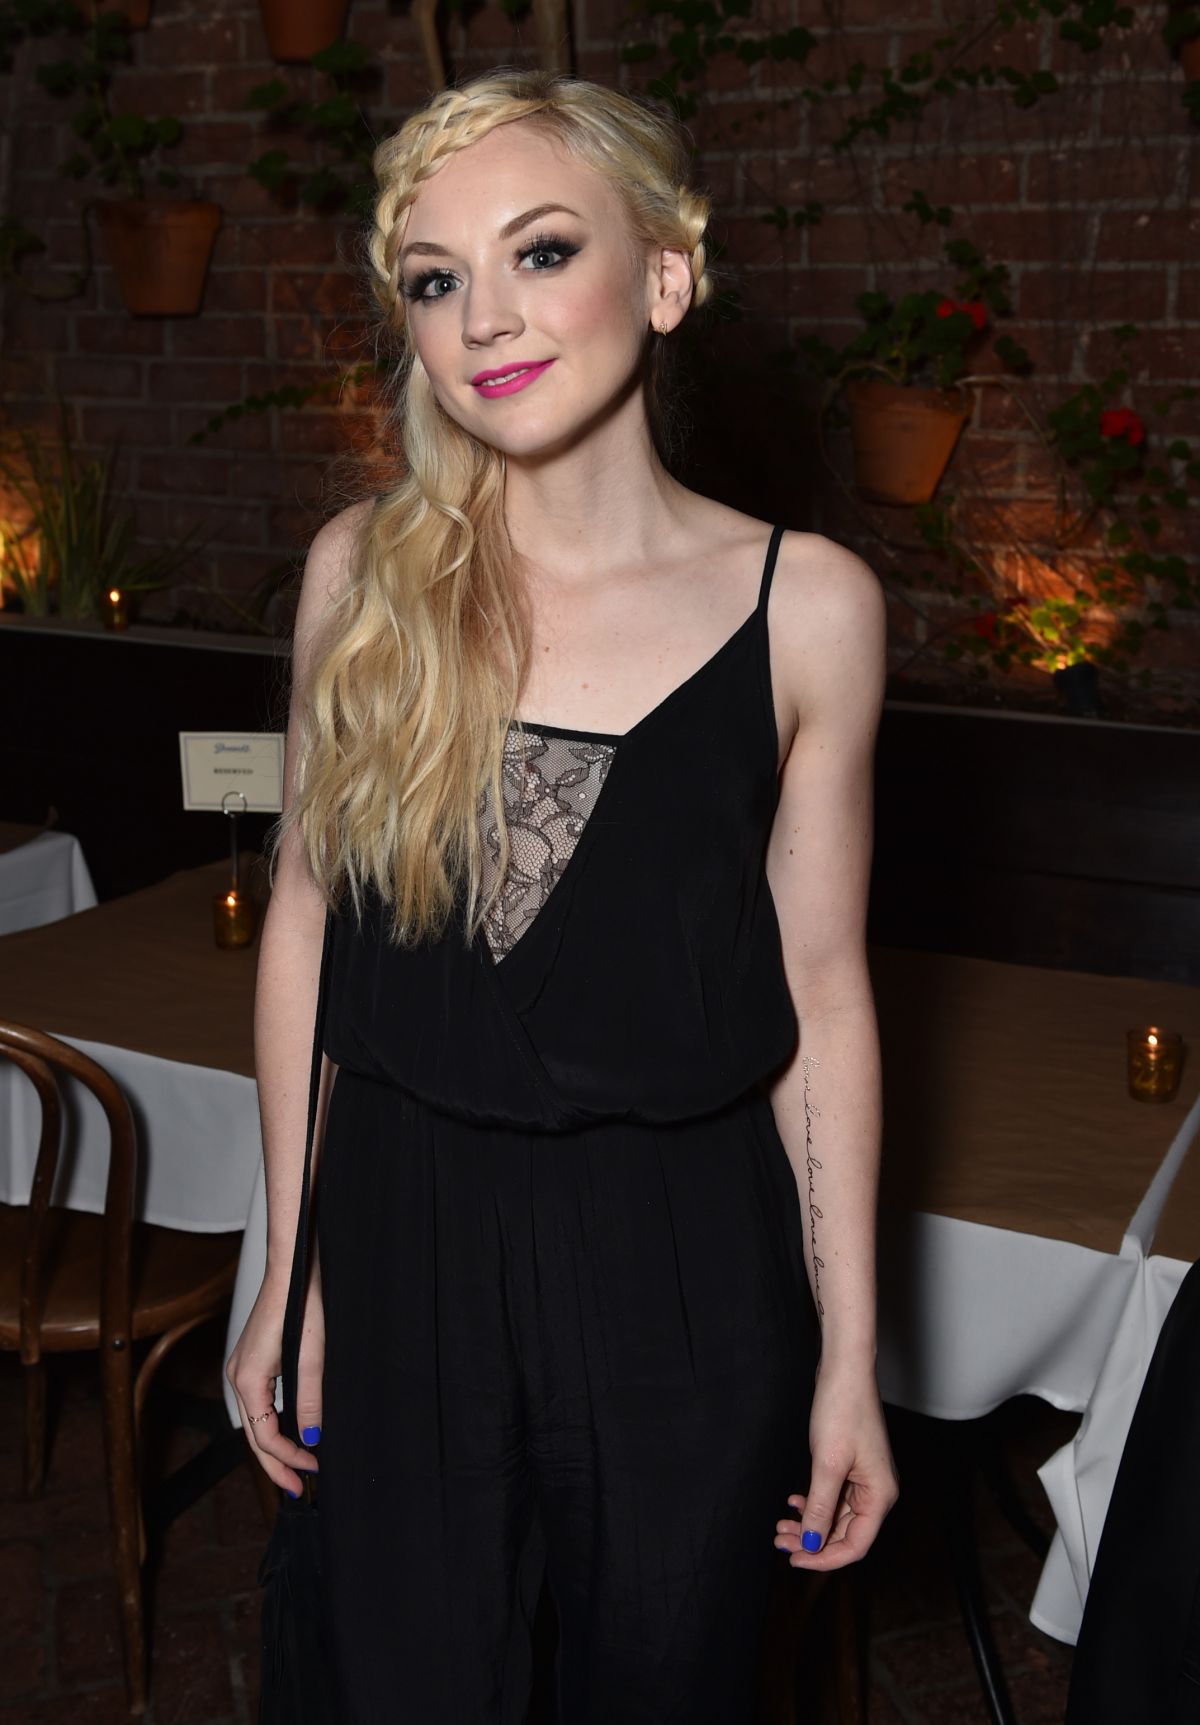 EMILY KINNEY at AMC Holiday Party in Hollywood – HawtCelebs